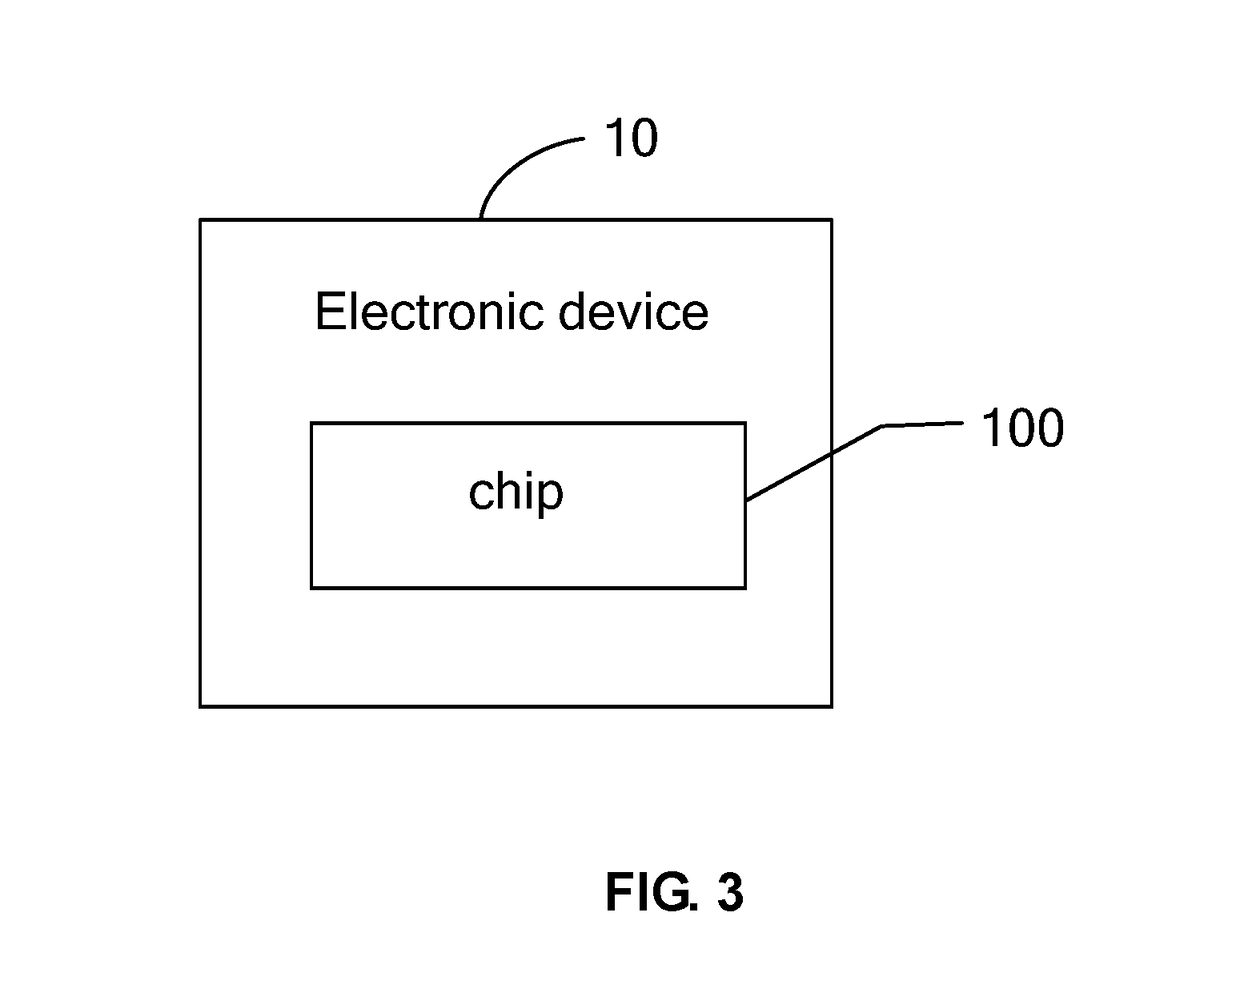 Chip and electronic device